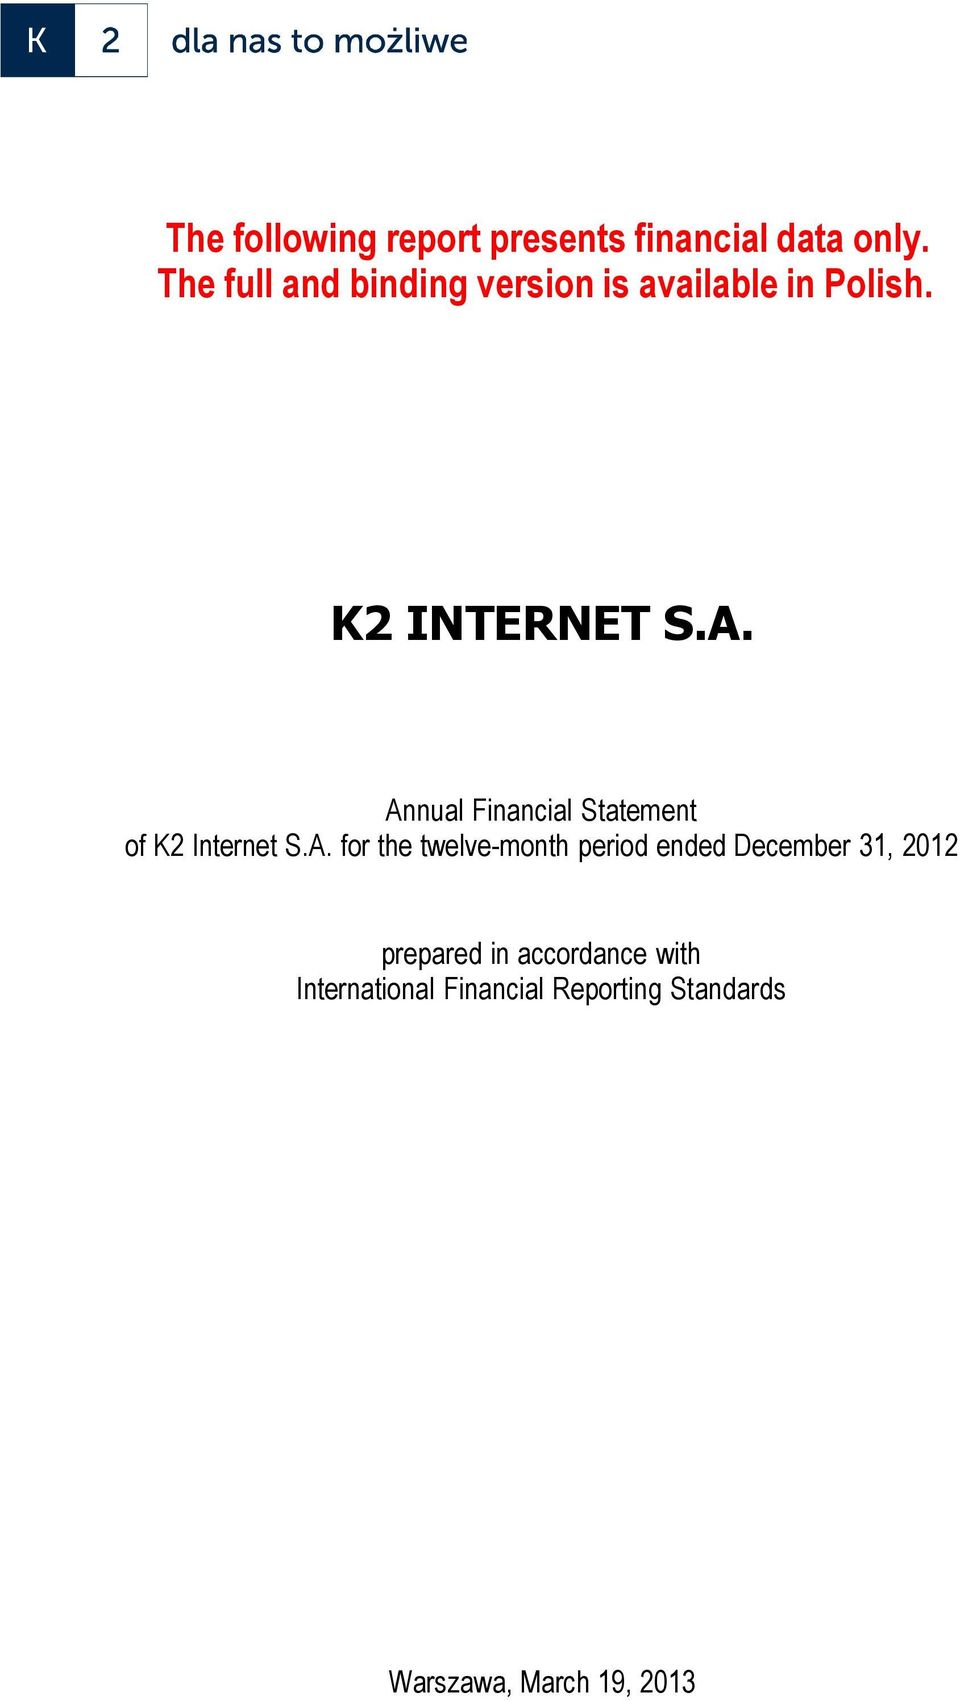 Annual Financial Statement of K2 Internet S.A. for the twelve-month period